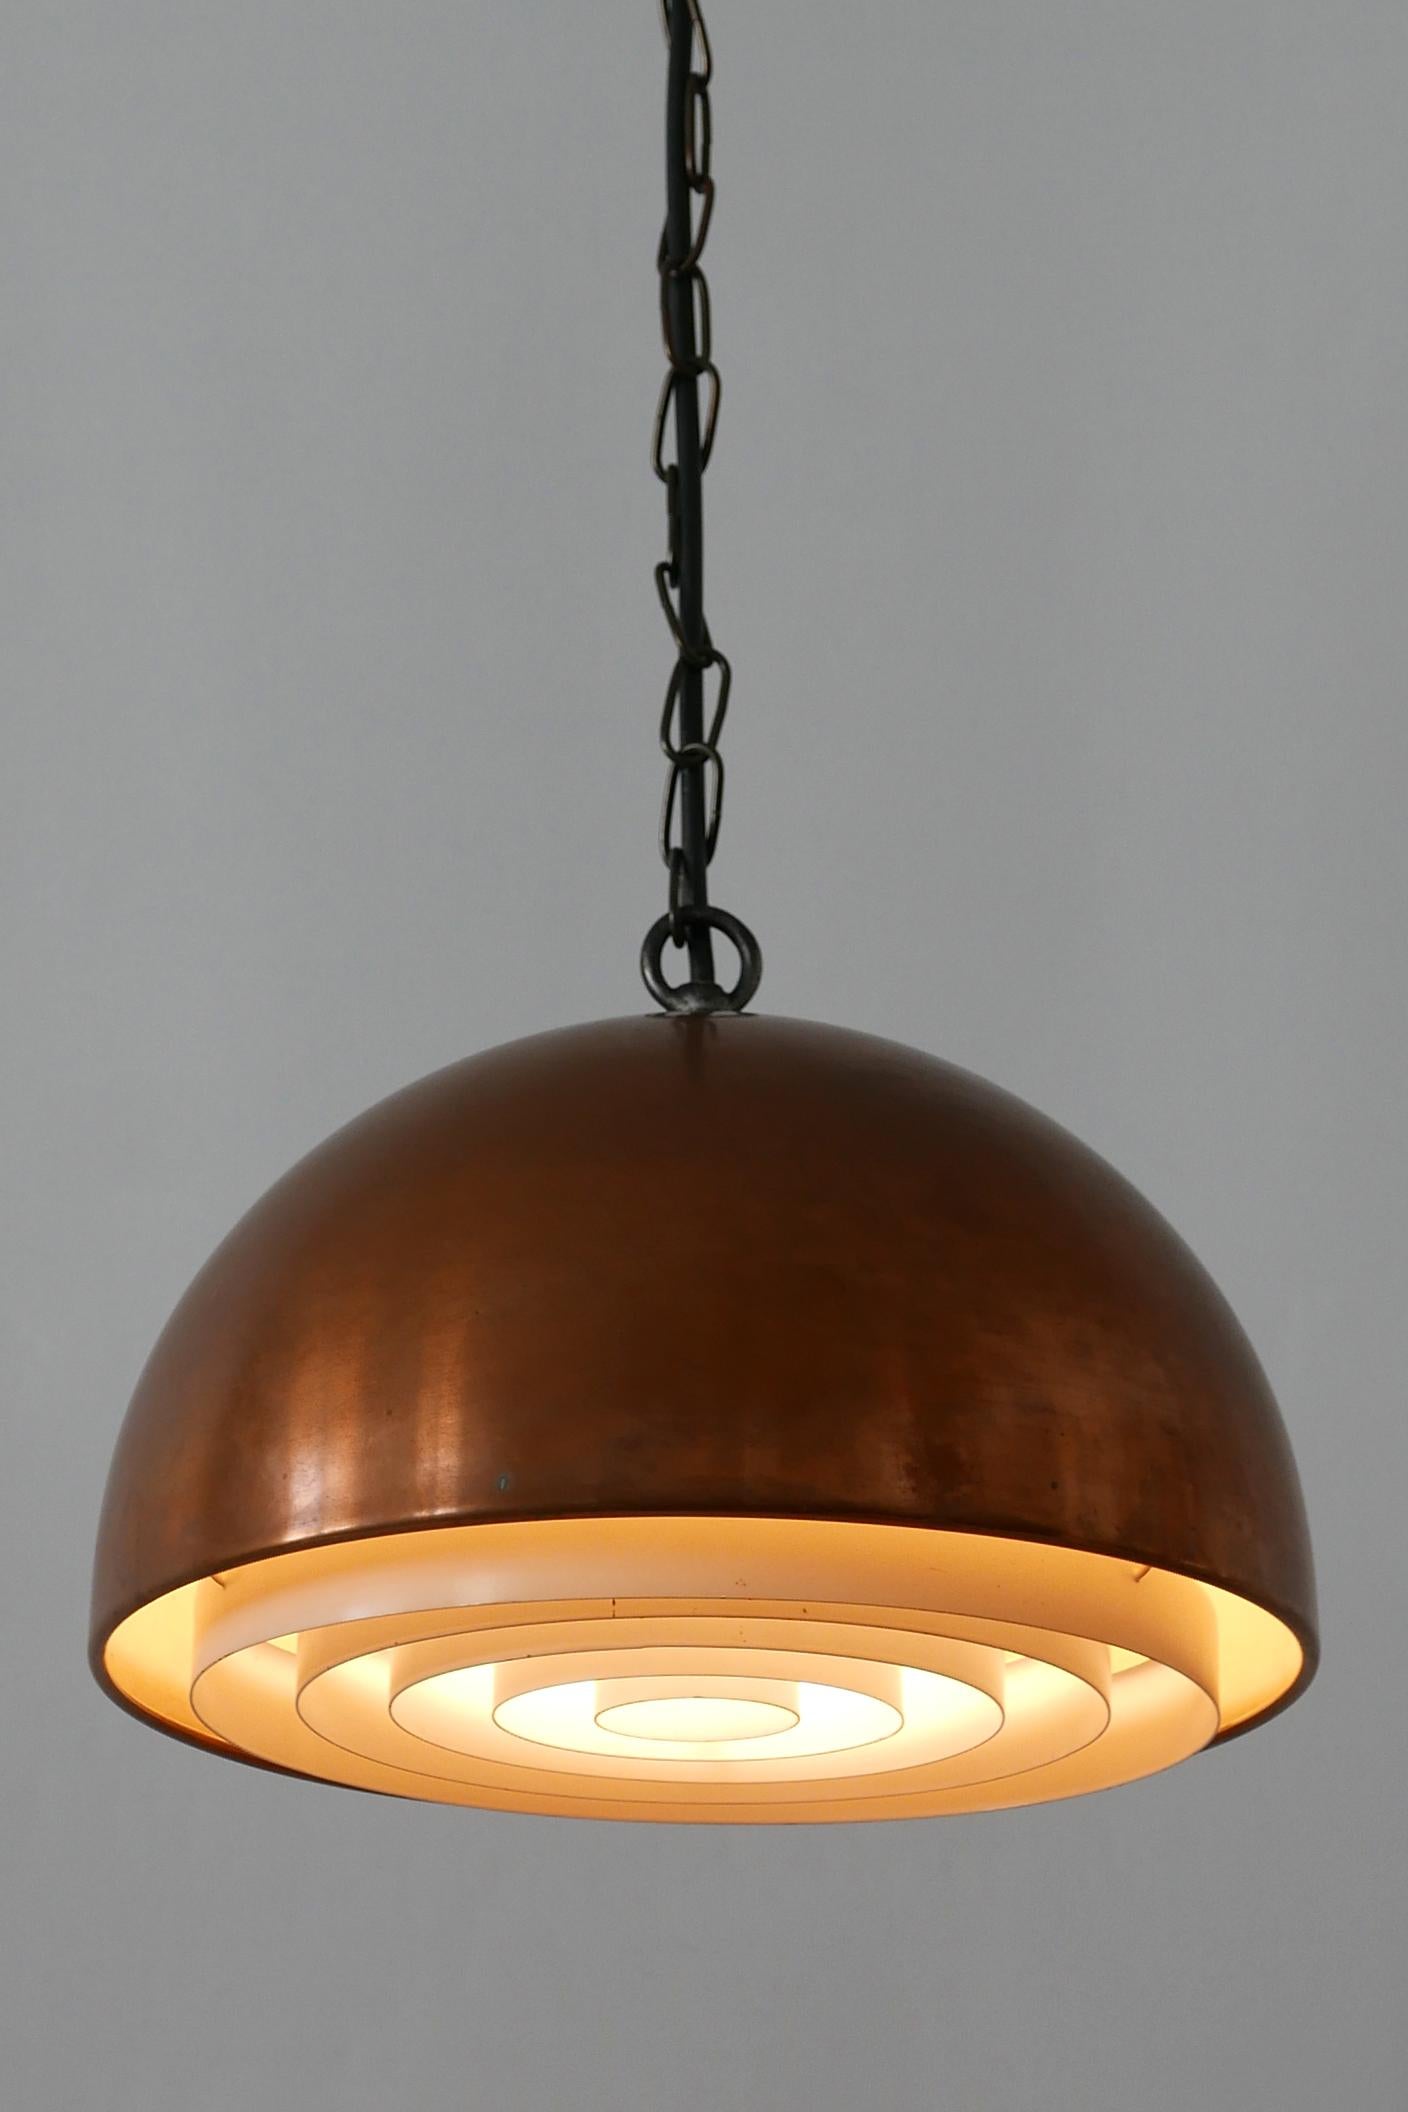 Beautiful Mid-Century Modern copper pendant lamp or hanging light 'Louisiana'. Designed by Vilhelm Wohlert and Jørgen Bo for Louis Poulsen, 1960s, Denmark.

Executed in copper and metal, the lamp needs 1 x E27 / E26 Edison screw fit bulb, is wired.